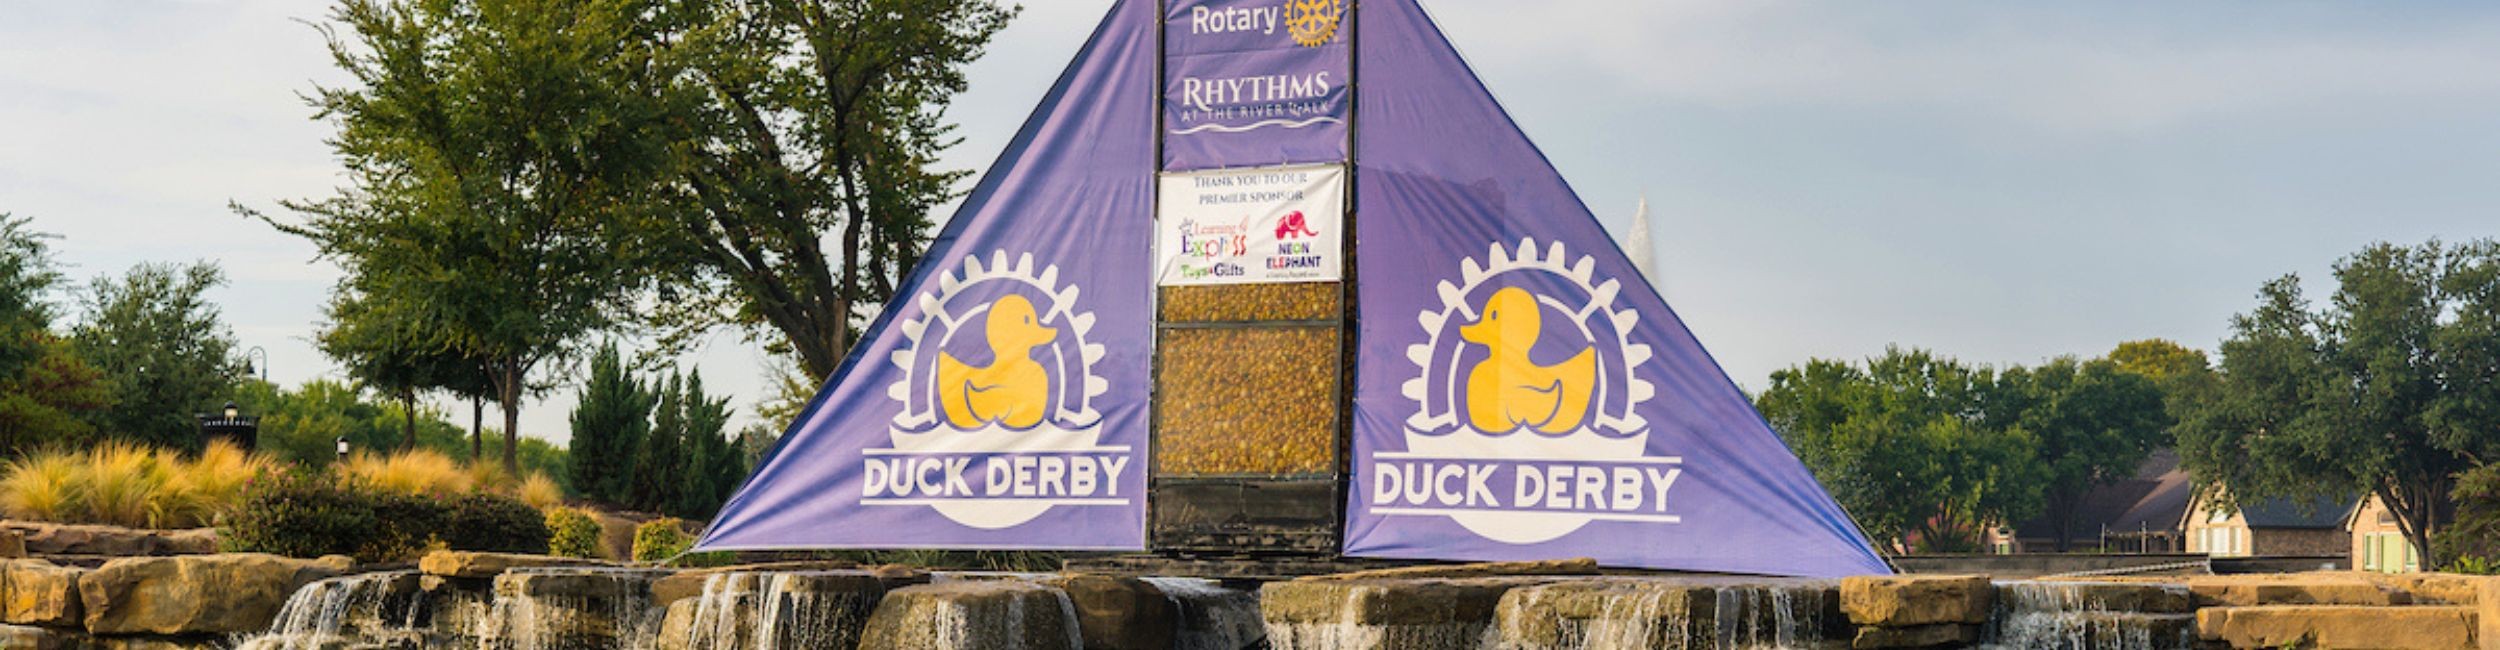 Cross Timbers Rotary Duck Derby